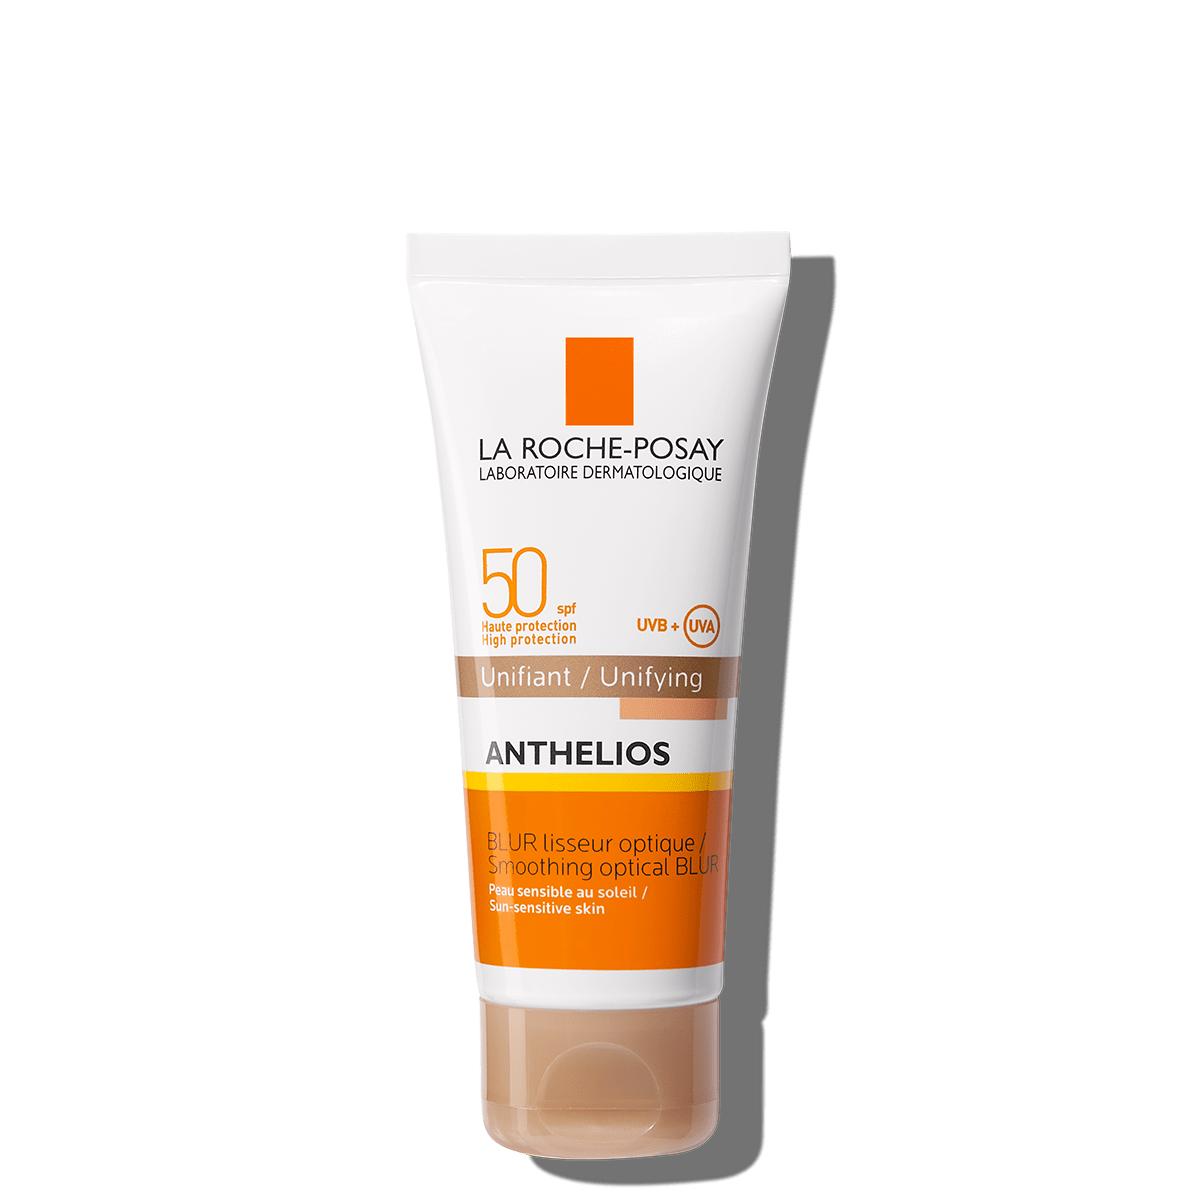 La Roche Posay ProductPage Sun Anthelios Smoothing Optical Blur Spf50 